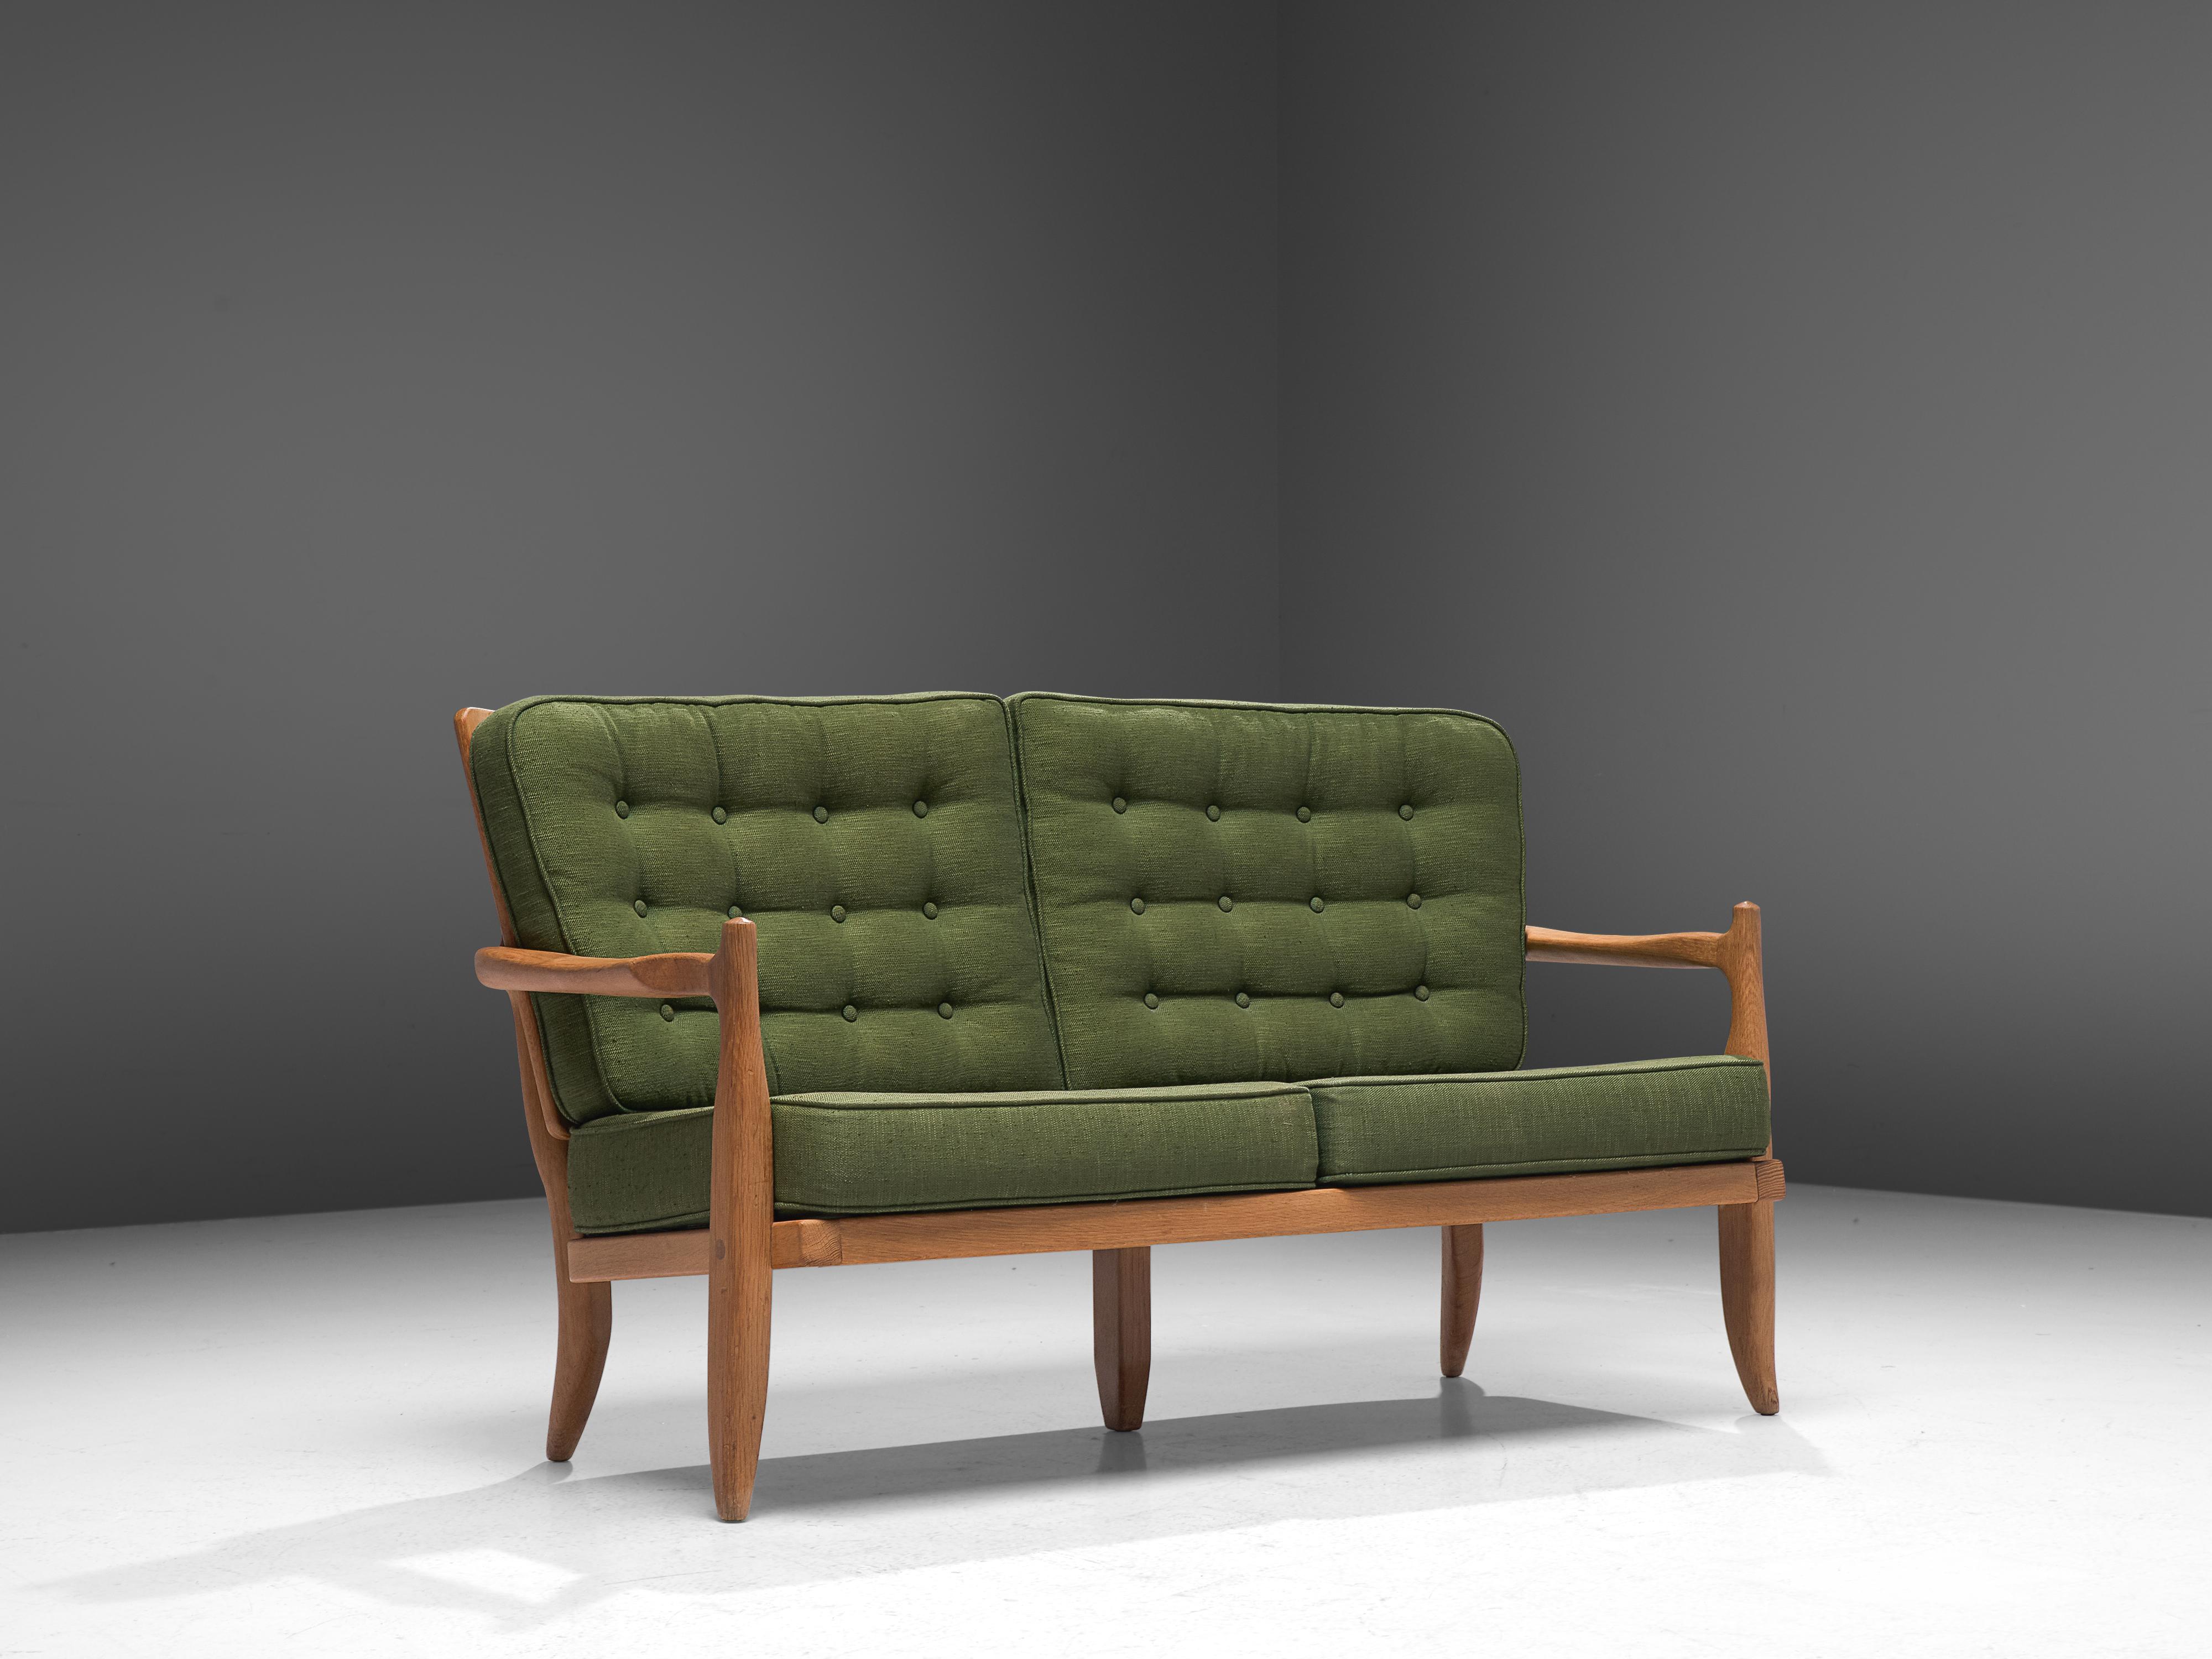 French Guillerme et Chambron Sofa in Moss Green Upholstery